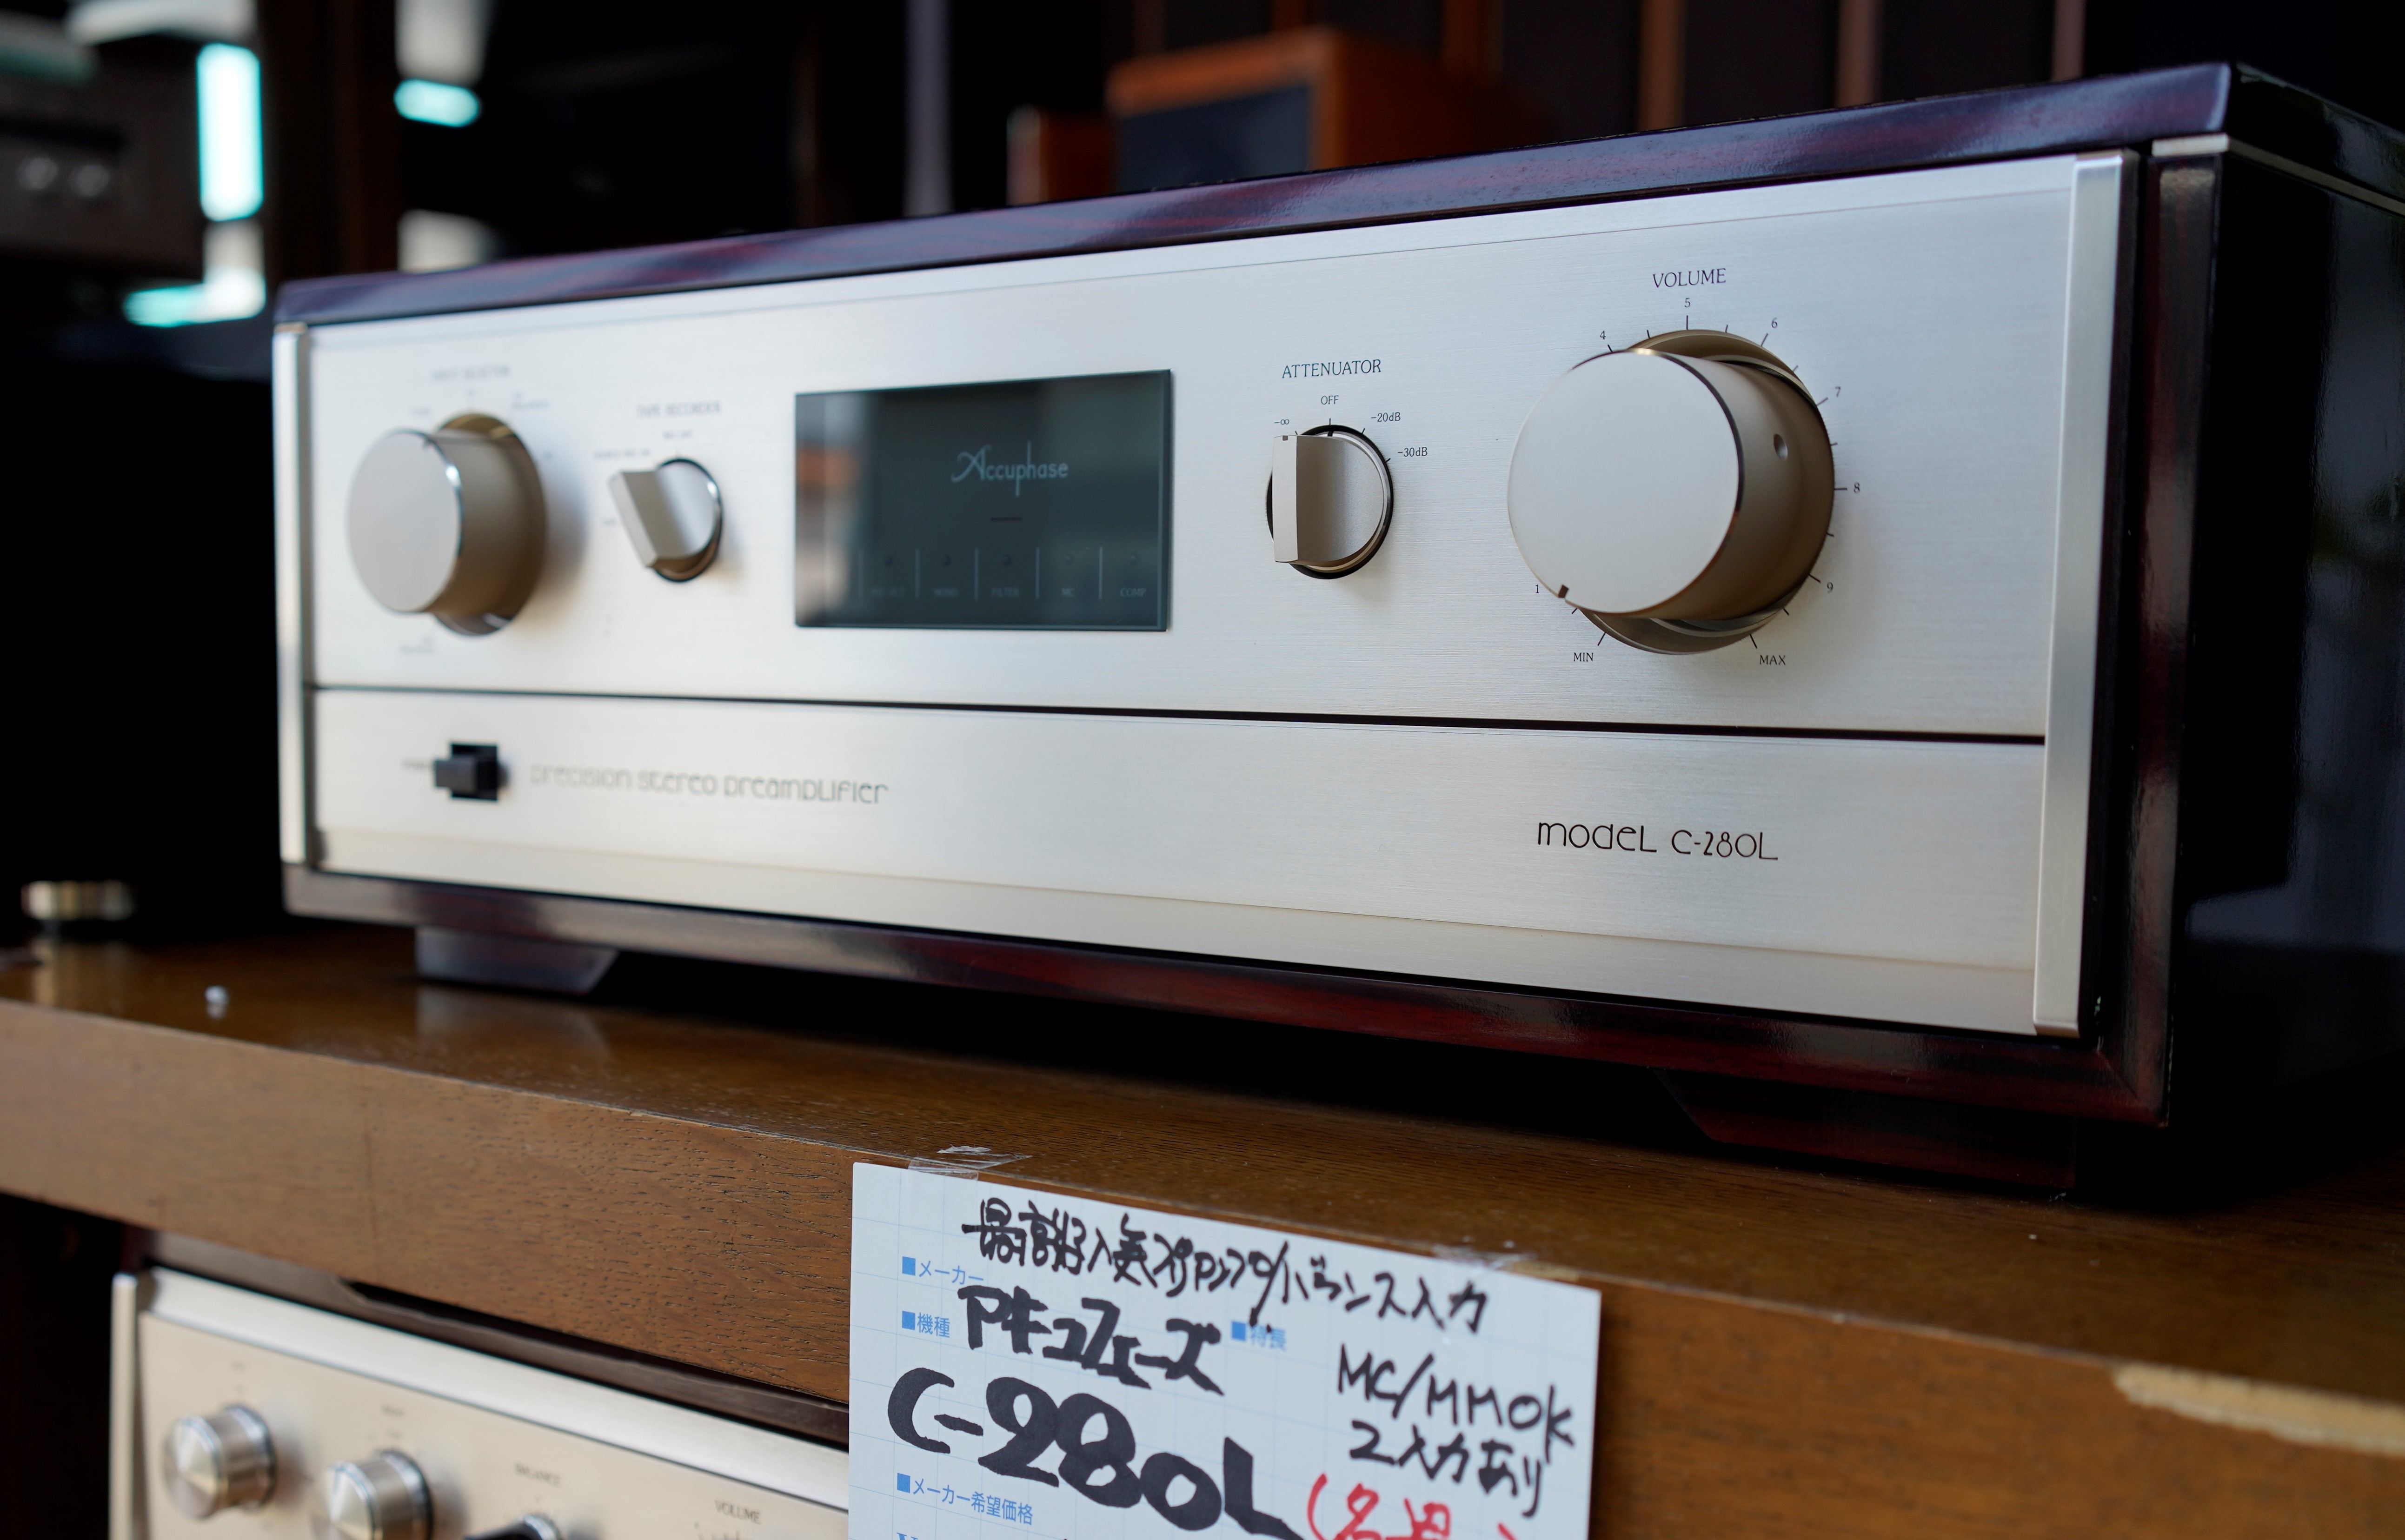 Accuphase C-280L,山口県オーディオショップ、広島県オーディオ、島根県オーディオ